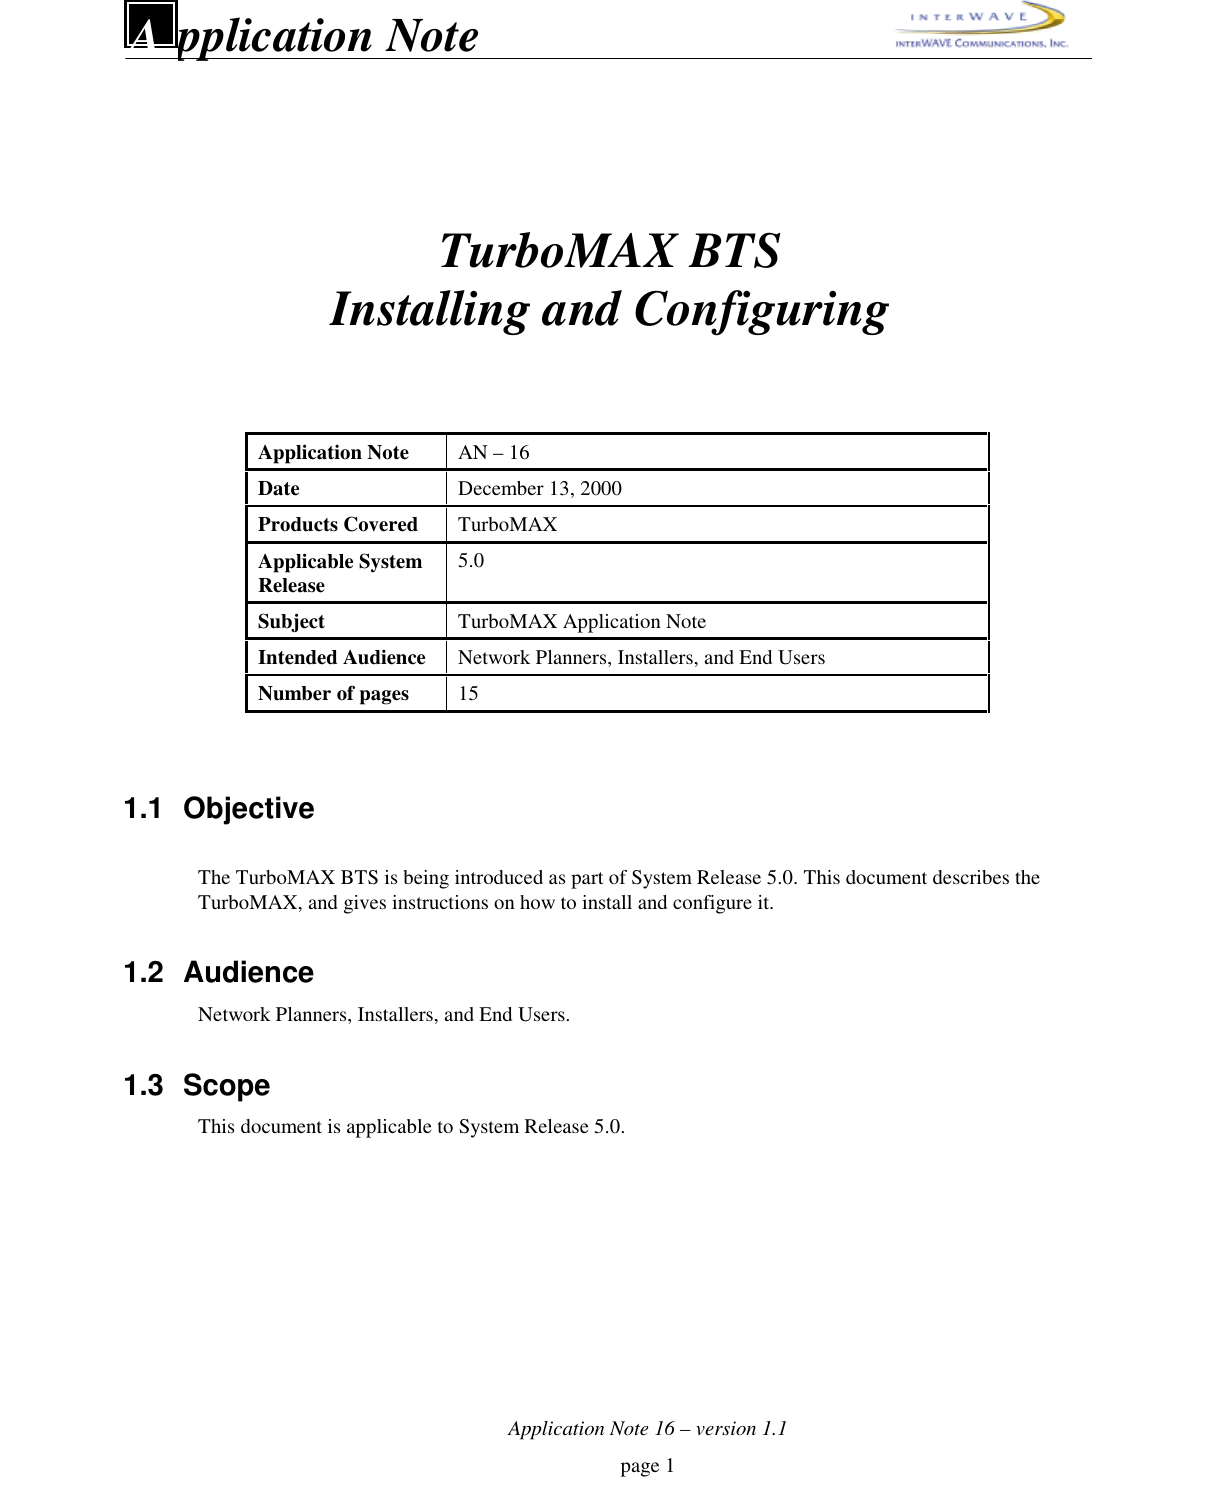 Application Note 16 – version 1.1page 1pplication NoteATurboMAX BTSInstalling and ConfiguringApplication Note AN – 16Date December 13, 2000Products Covered TurboMAXApplicable SystemRelease 5.0Subject TurboMAX Application NoteIntended Audience Network Planners, Installers, and End UsersNumber of pages 151.1 ObjectiveThe TurboMAX BTS is being introduced as part of System Release 5.0. This document describes theTurboMAX, and gives instructions on how to install and configure it.1.2 AudienceNetwork Planners, Installers, and End Users.1.3 ScopeThis document is applicable to System Release 5.0.